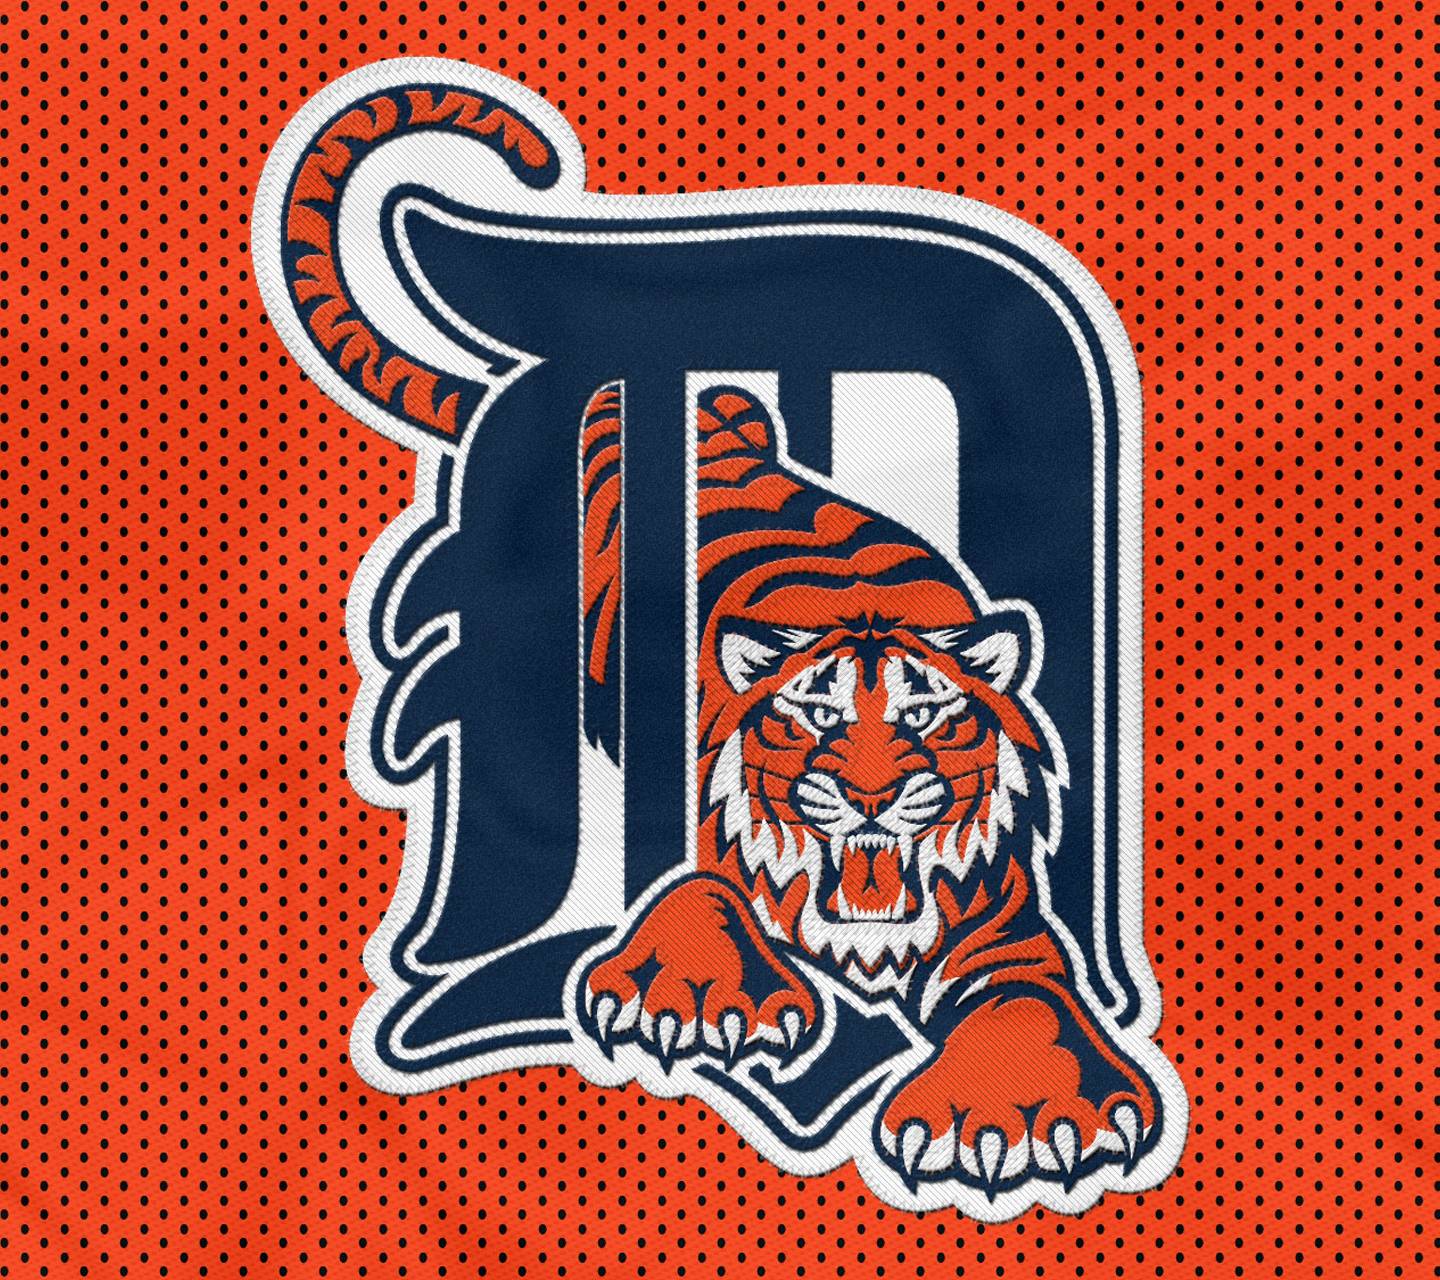 Detroit Tigers wallpapers by neuor • ZEDGE™